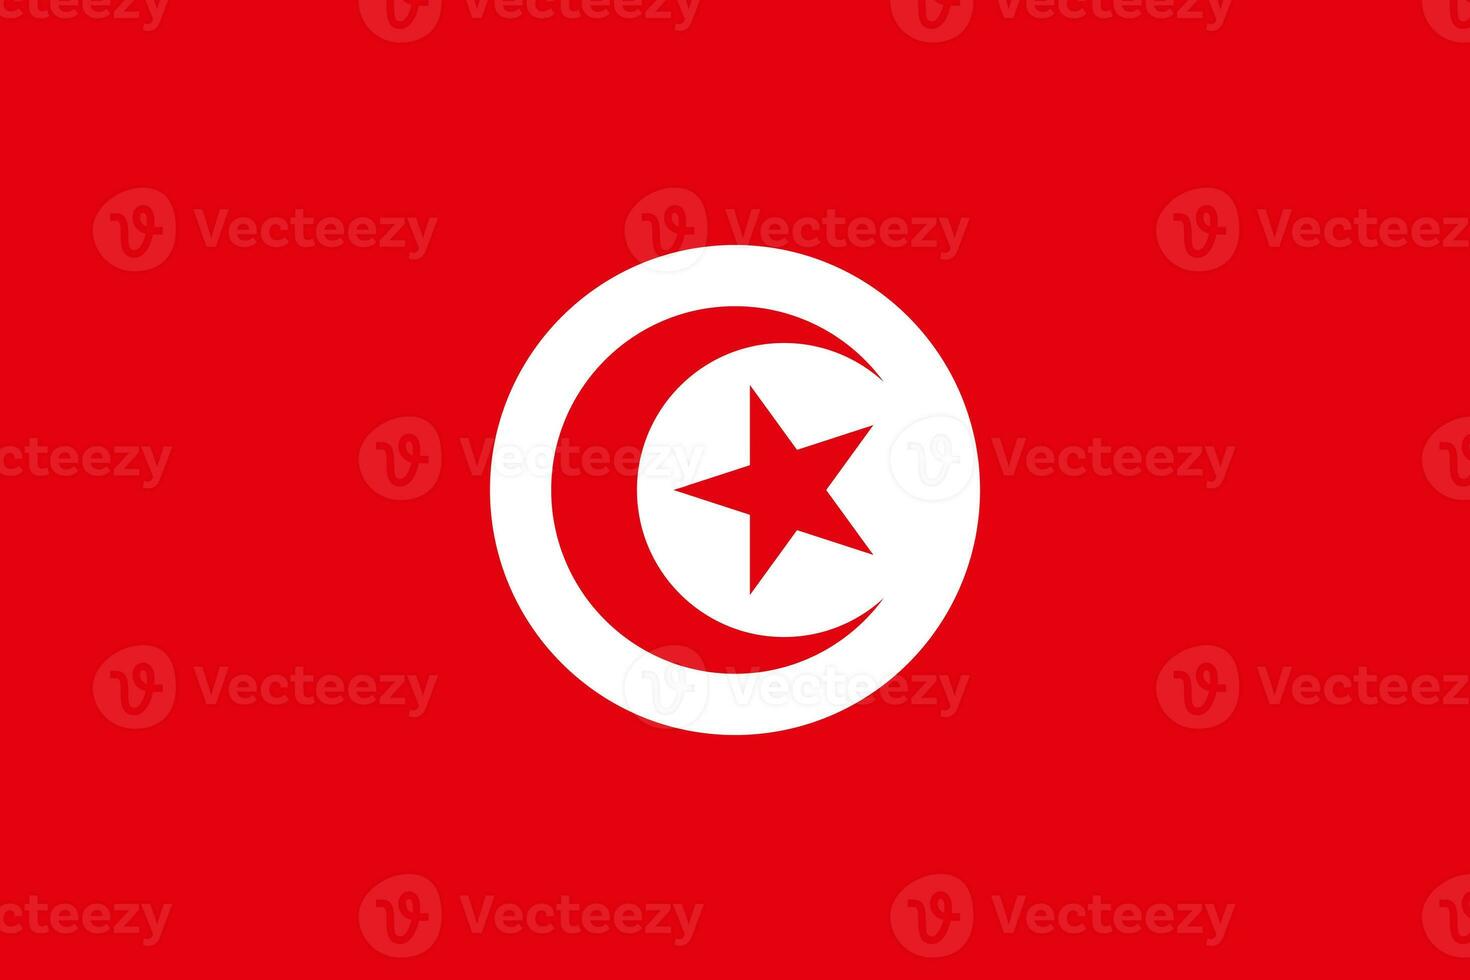 The official current flag of Tunisian Republic. State flag of Tunisia. Illustration. photo